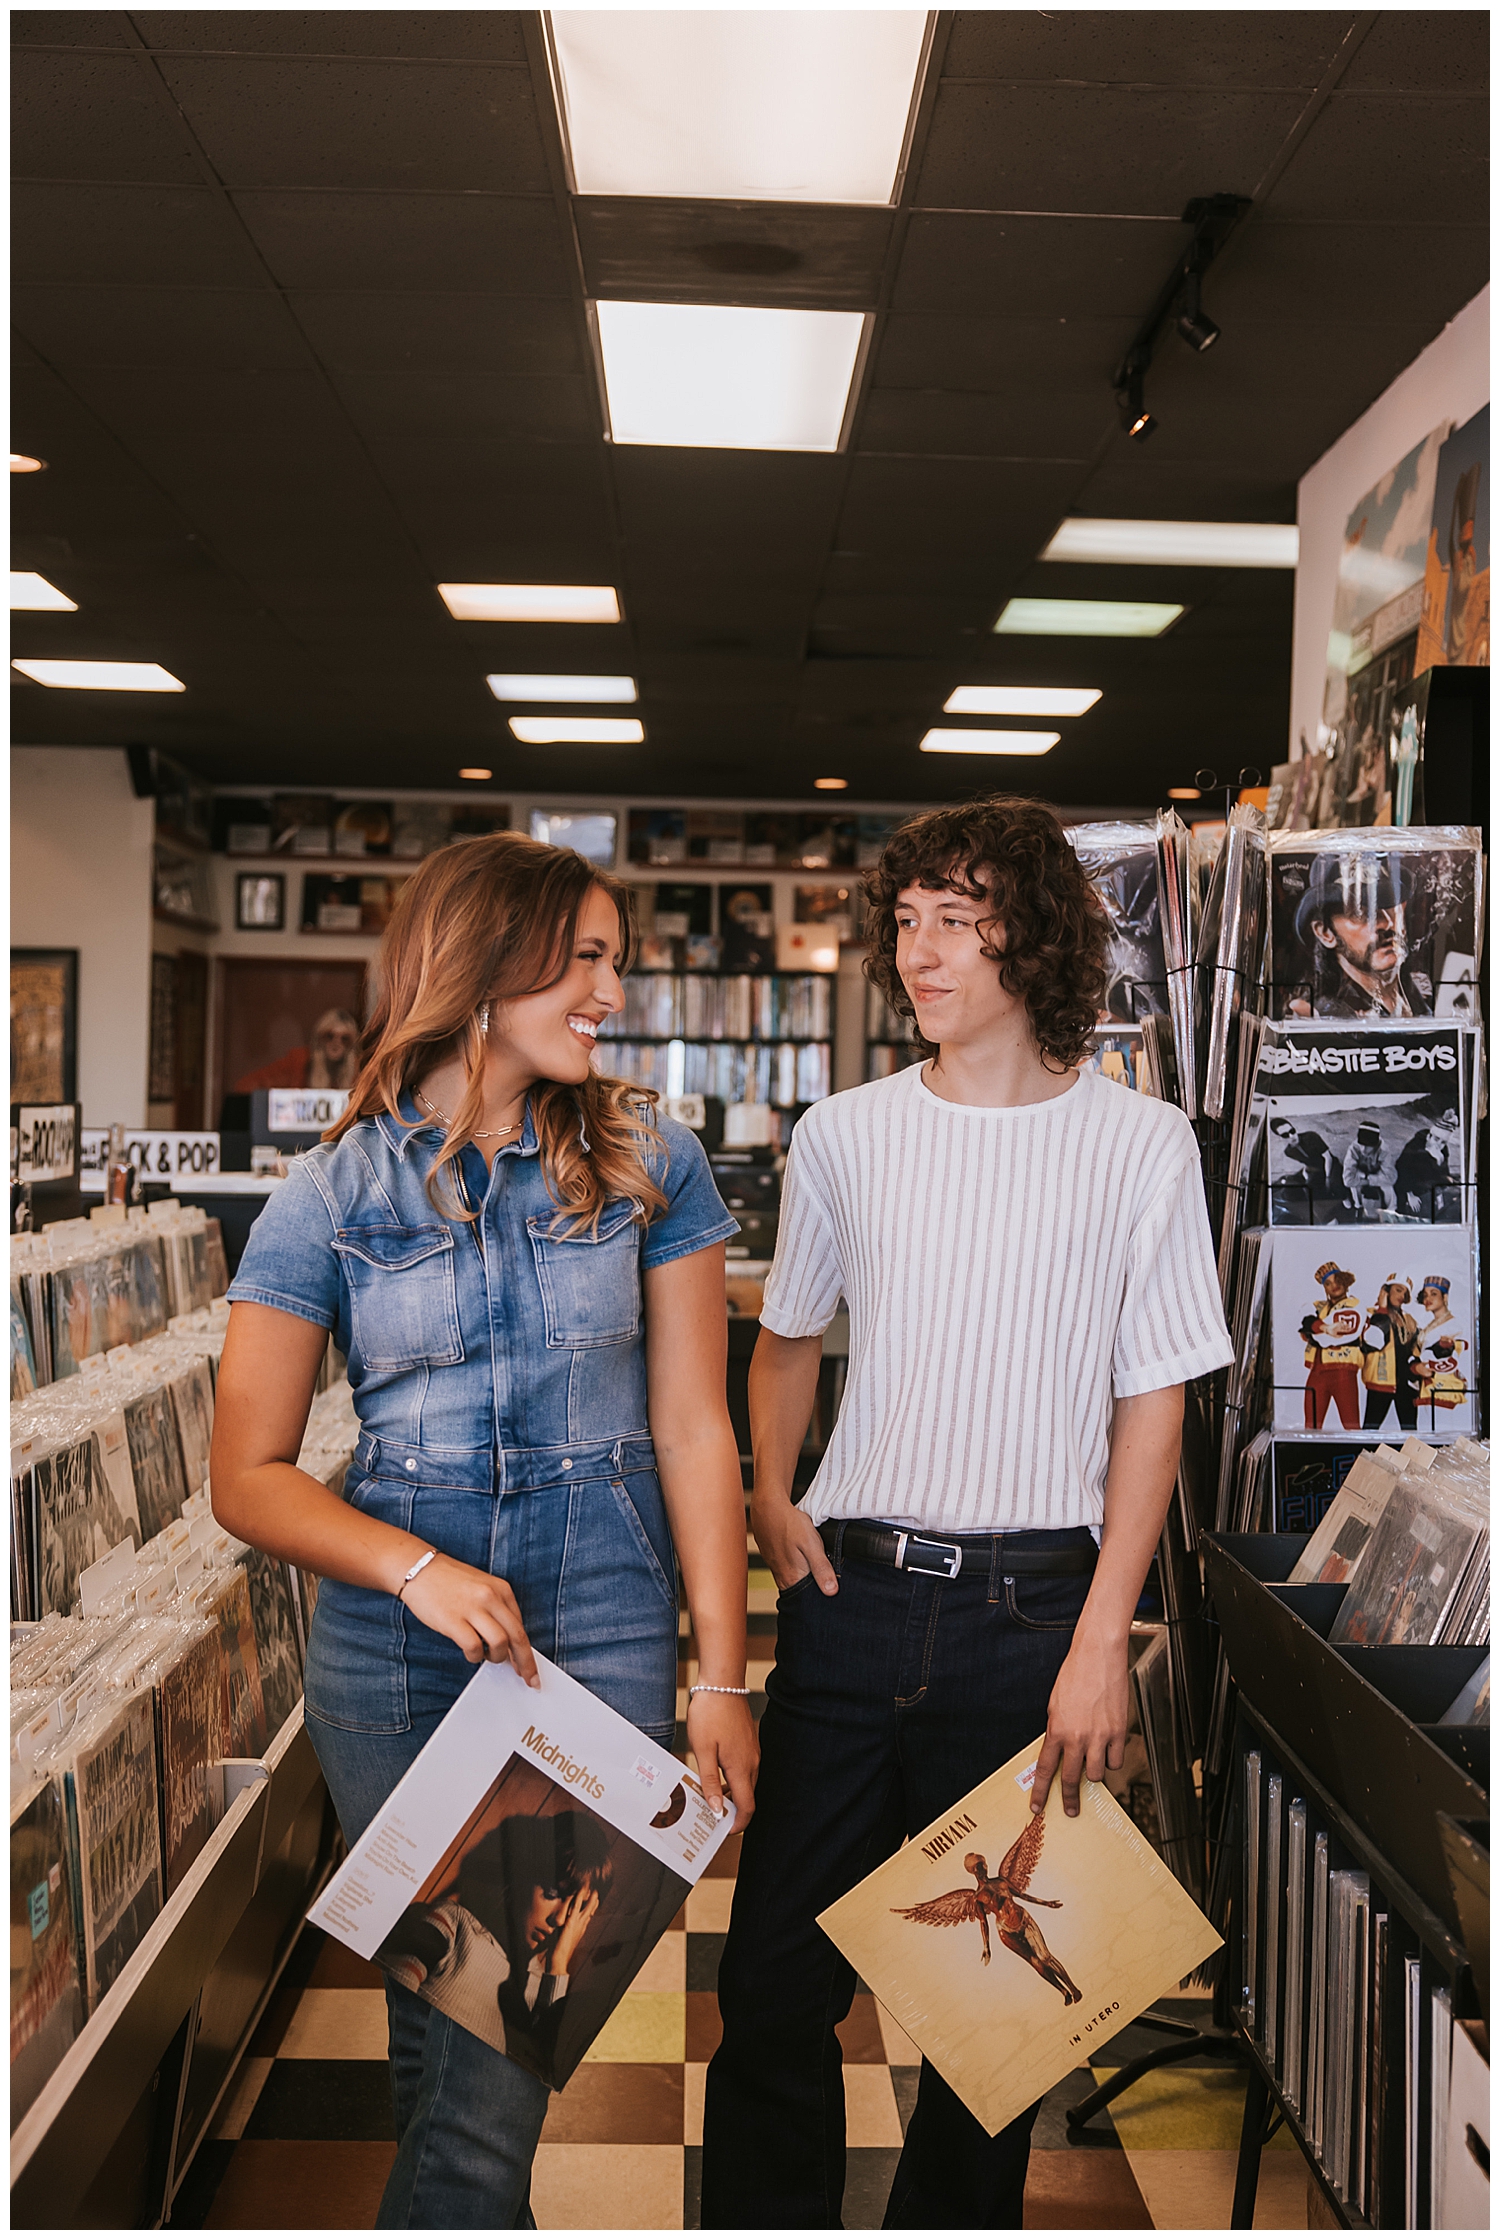 high school girl and boy siblings smiling at each other inside record store holding albums in hands